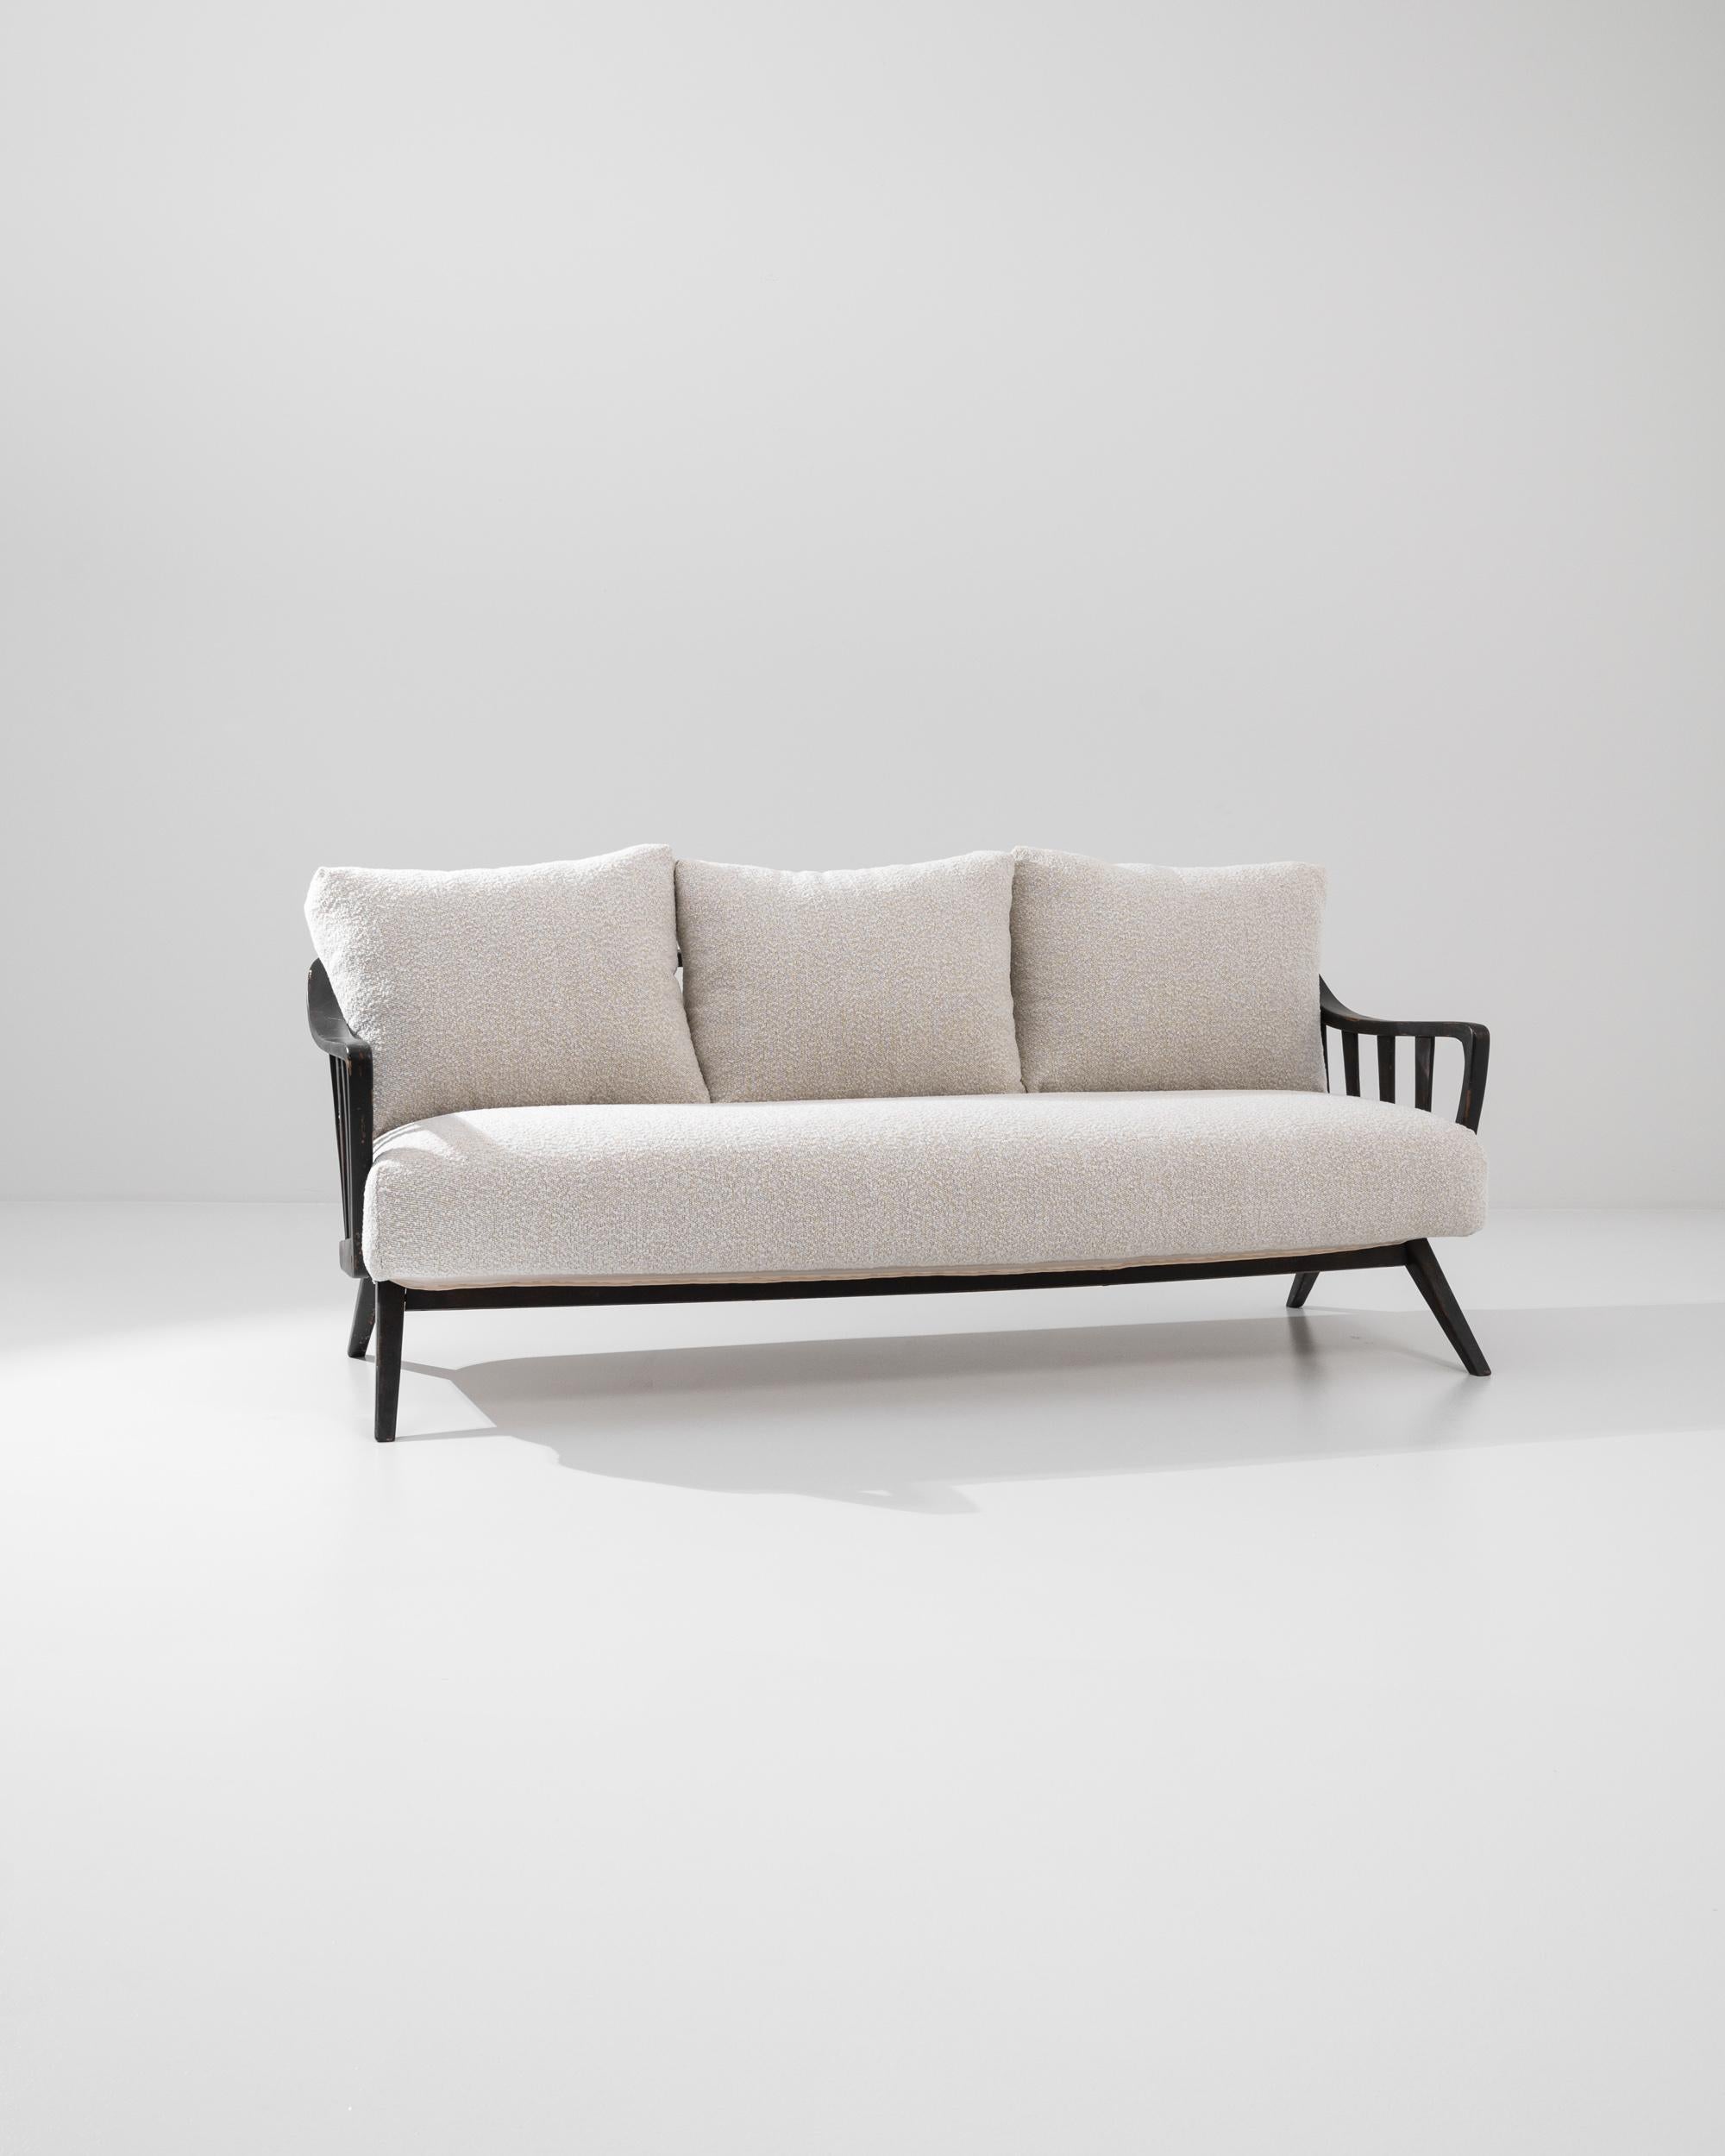 Simple and elegant, this vintage sofa combines the lyrical shapes of Biedermeier furniture with a graphic Modernist twist. Made in Germany in the 1950s, harp-shaped armrests frame the generous pillows of the seat; the clean angles of the legs